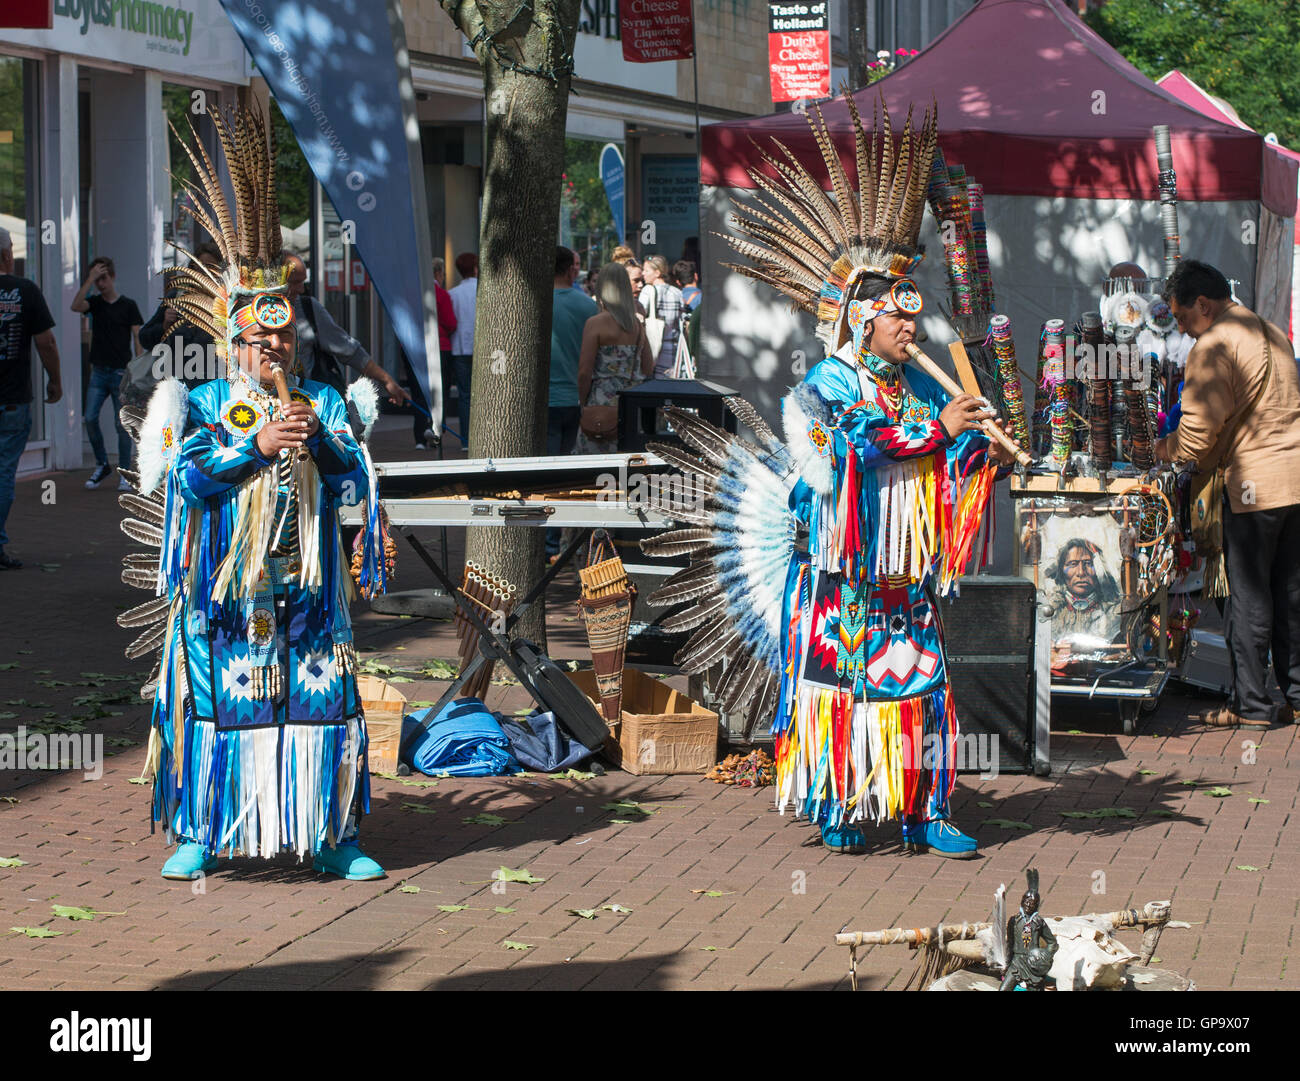 South American Indians in traditional dress playing pipes, Carlisle, Cumbria, England, UK Stock Photo